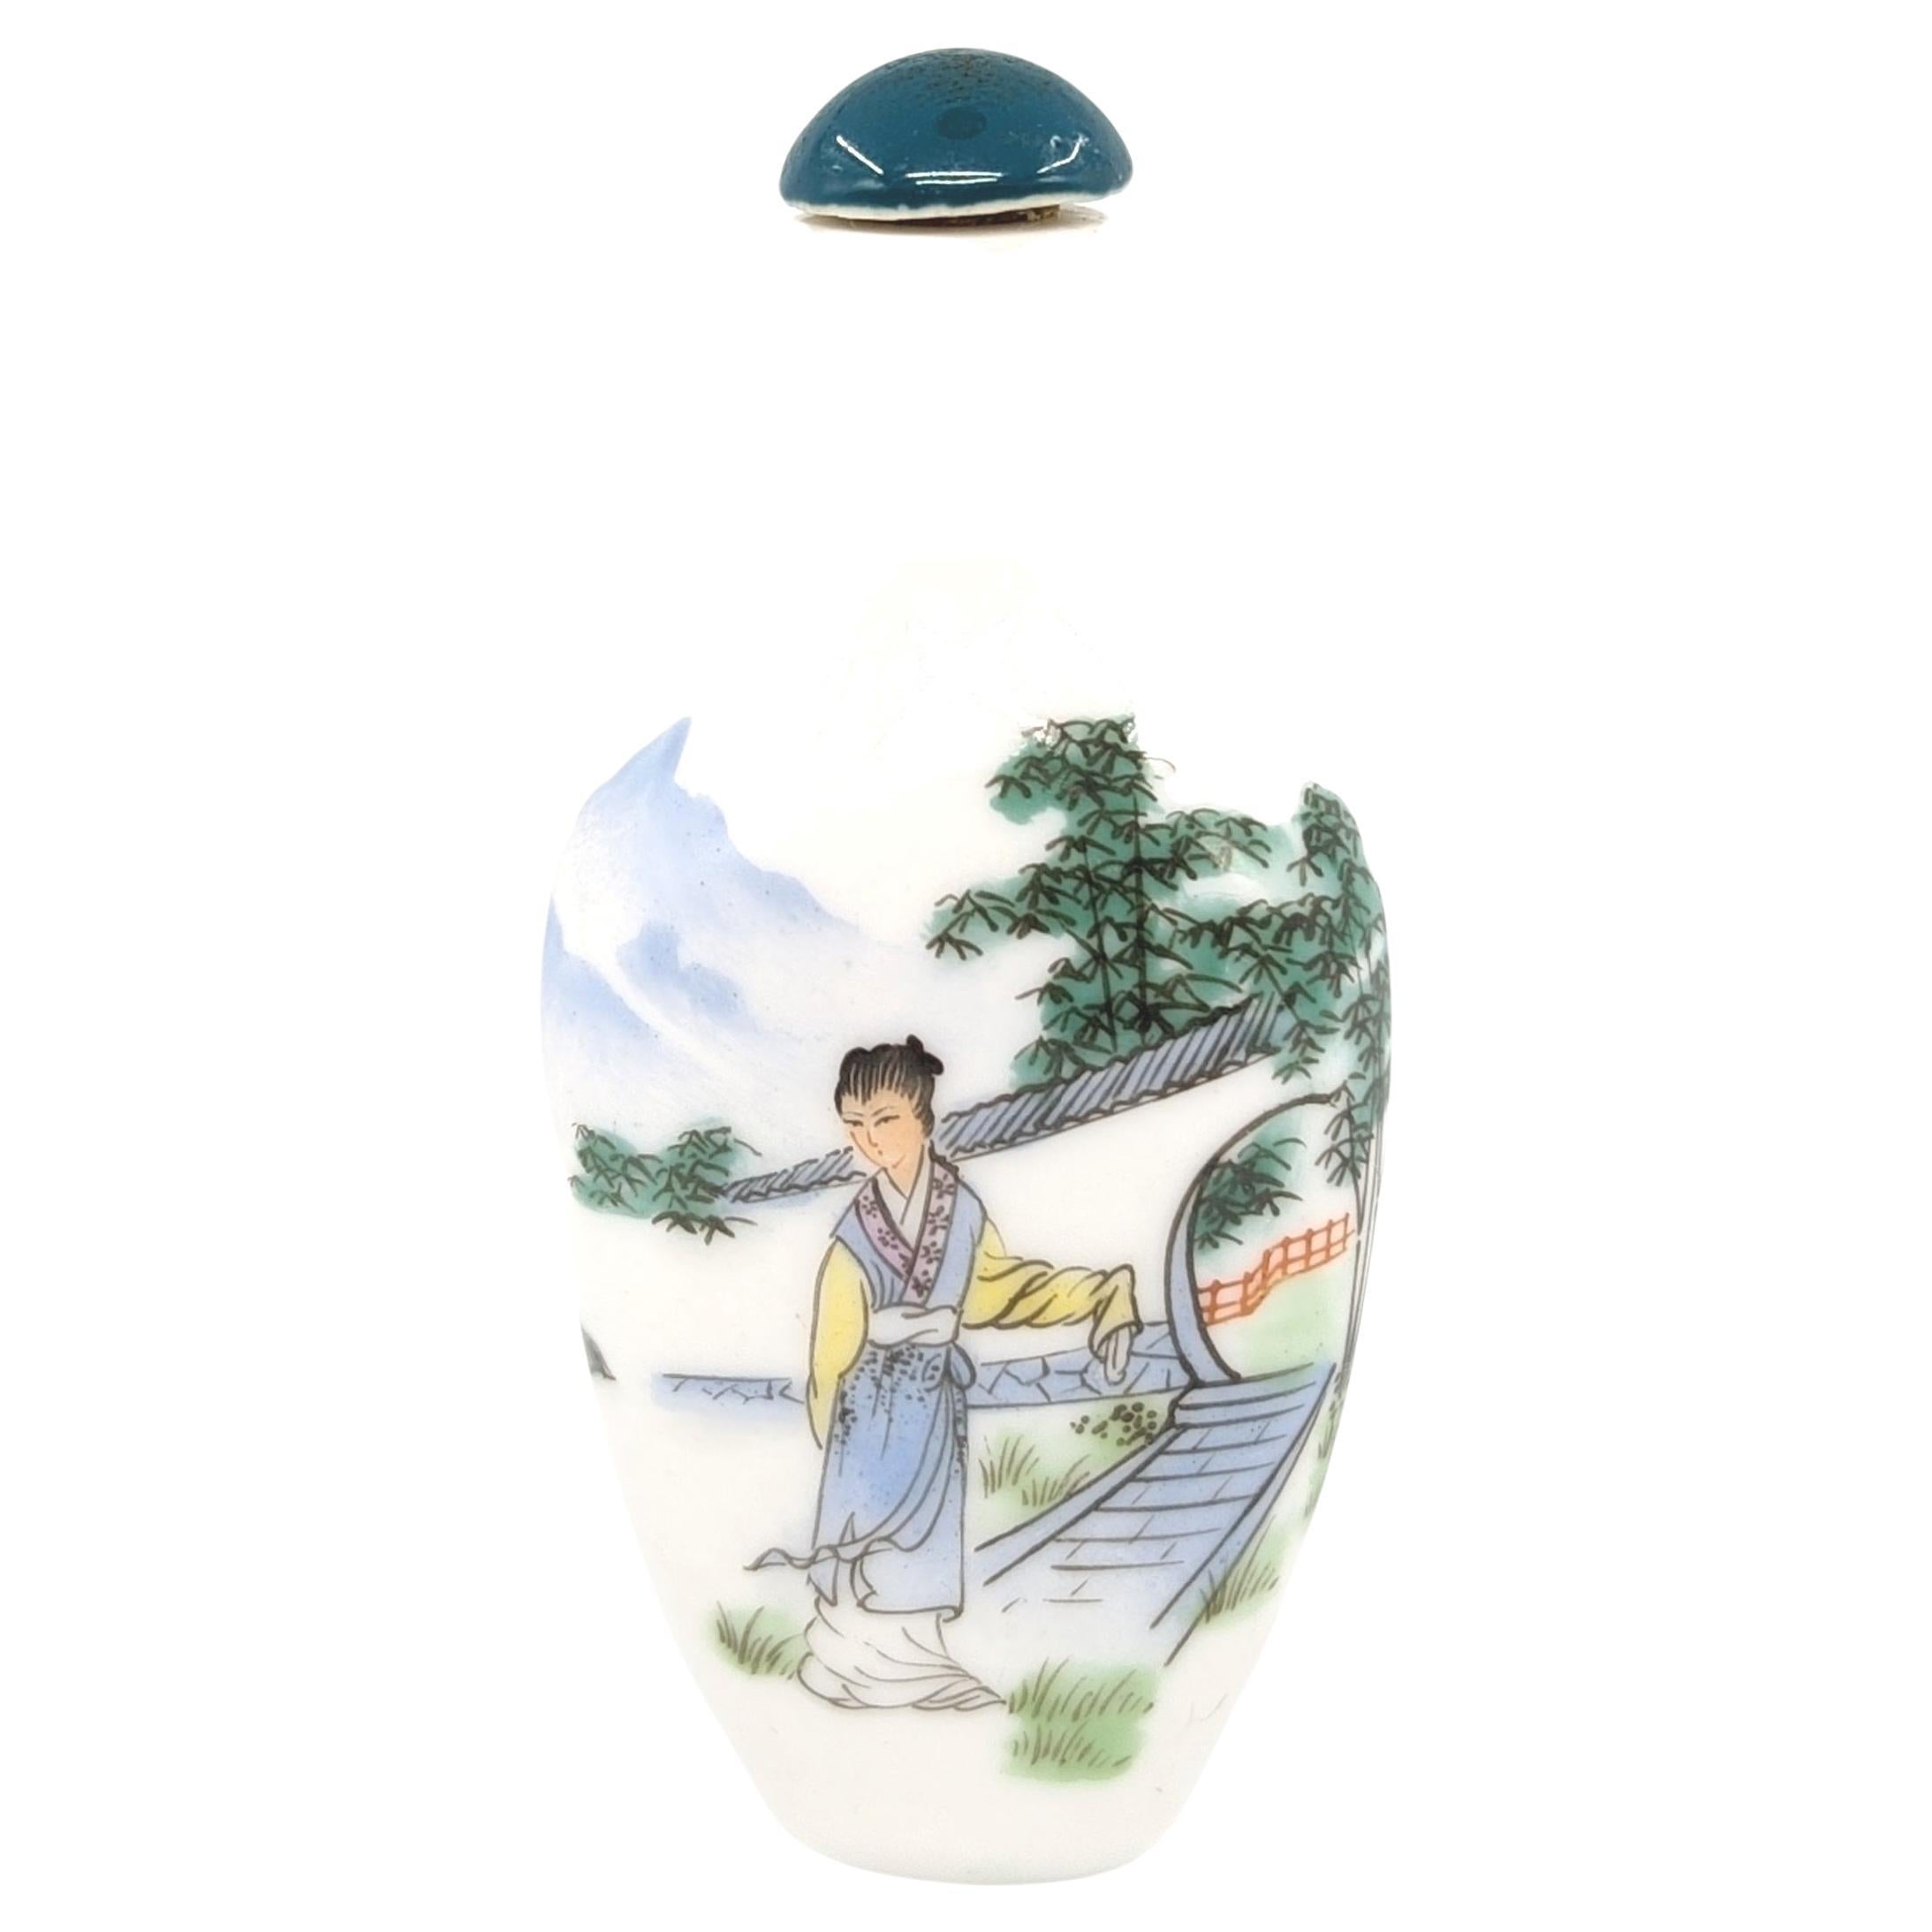 A vintage Chinese porcelain snuff bottle, hand painted with a beauty in a courtyard setting on each side, and signed “癸丑年” （